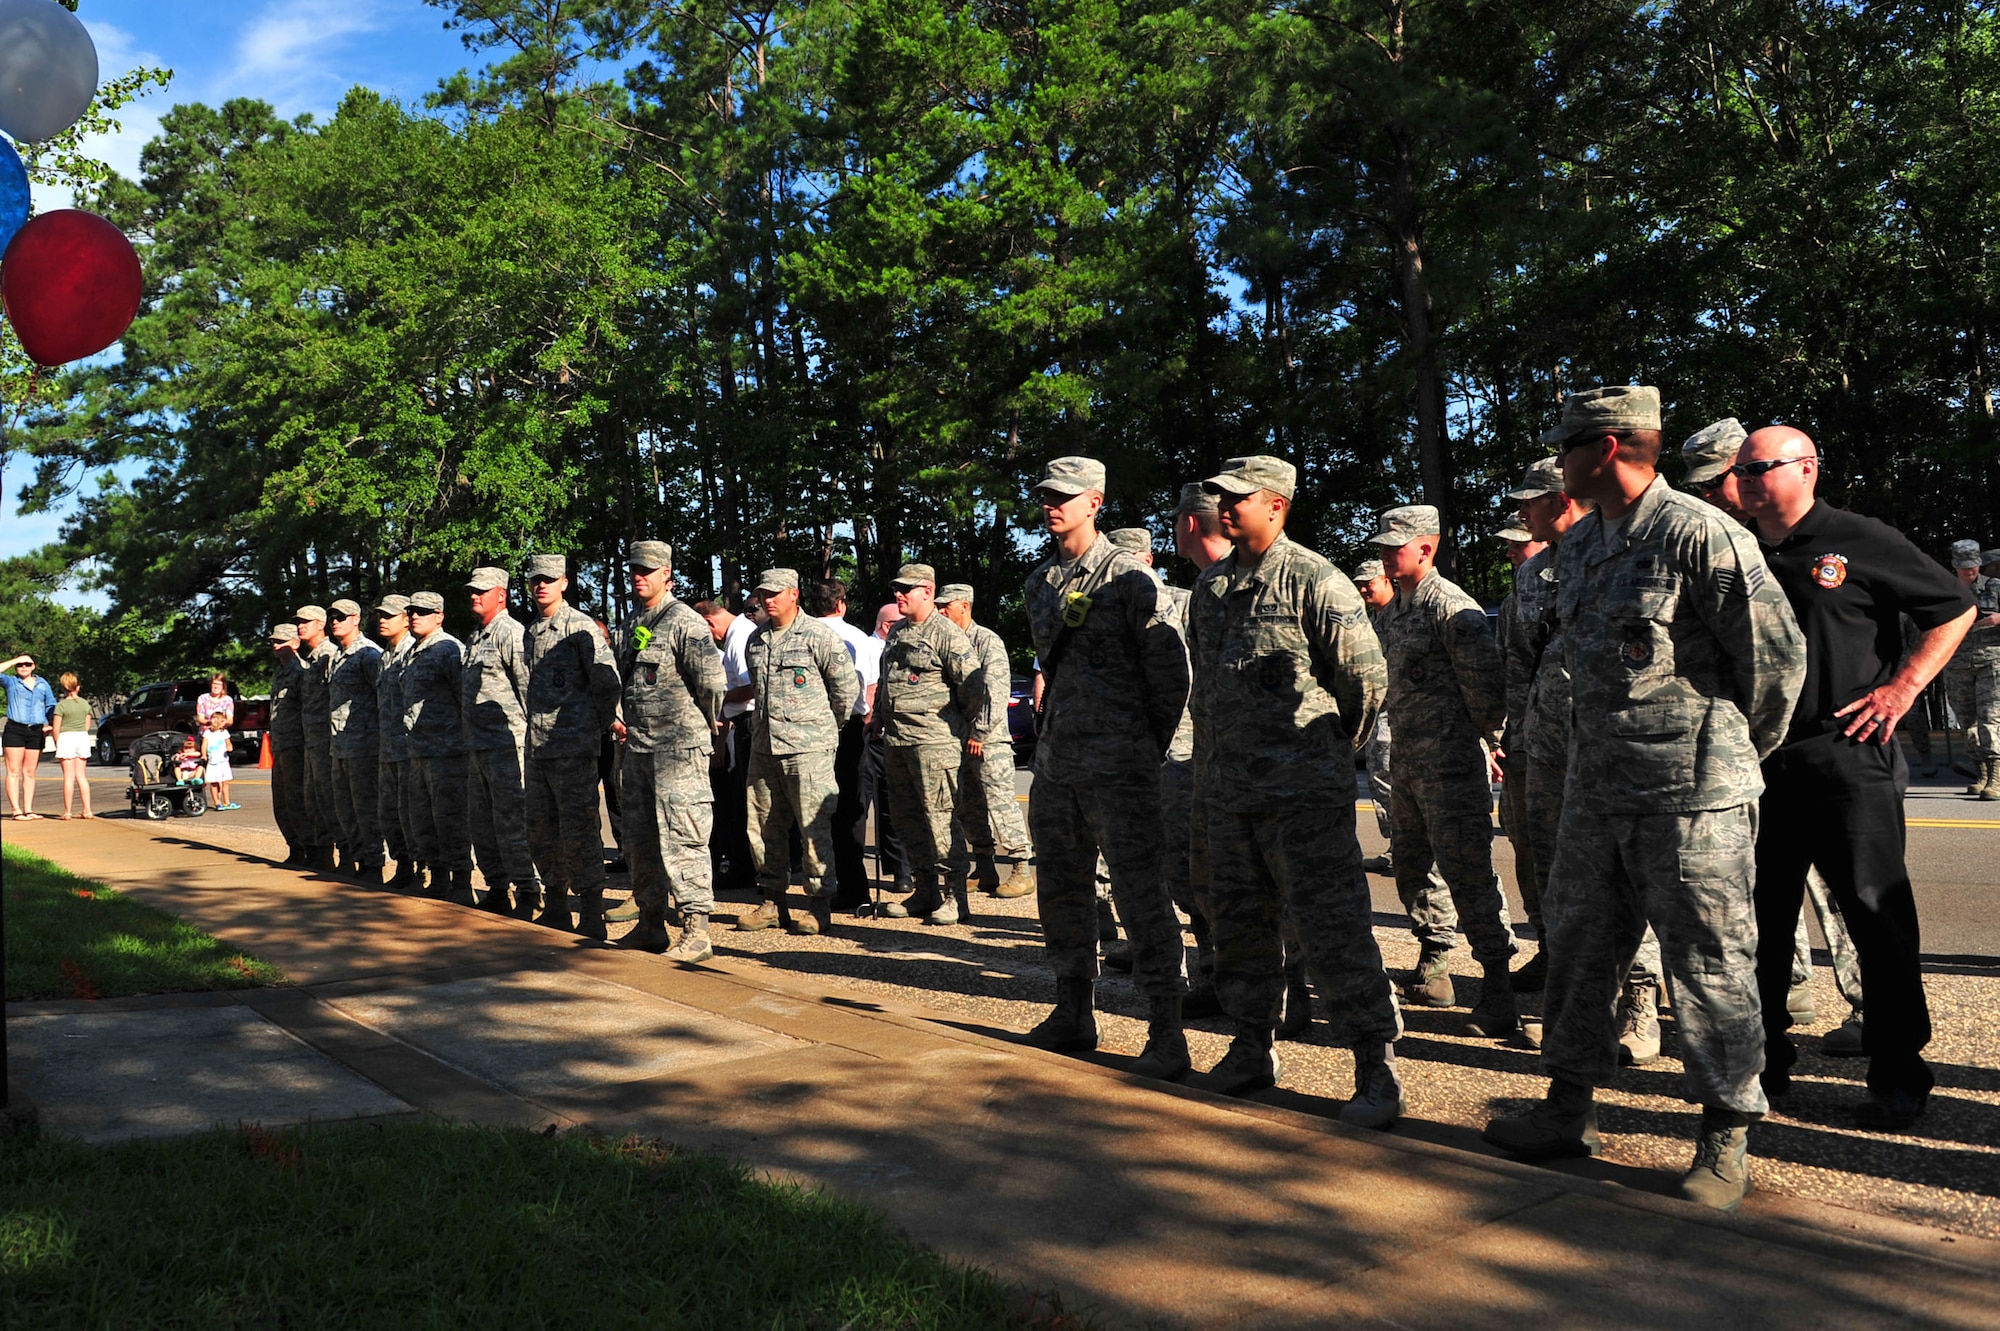 A crowd gathers before a ribbon cutting ceremony at a new 20th Civil Engineer Squadron fire station Shaw Air Force Base, S.C., June 29, 2017. The ceremony marked the opening of a new fire station in the base housing area, which enables firefighters to respond within the Department of Defense mandated response time when reacting to emergencies in the housing area. (U.S. Air Force photo by Airman 1st Class Kathryn R.C. Reaves)